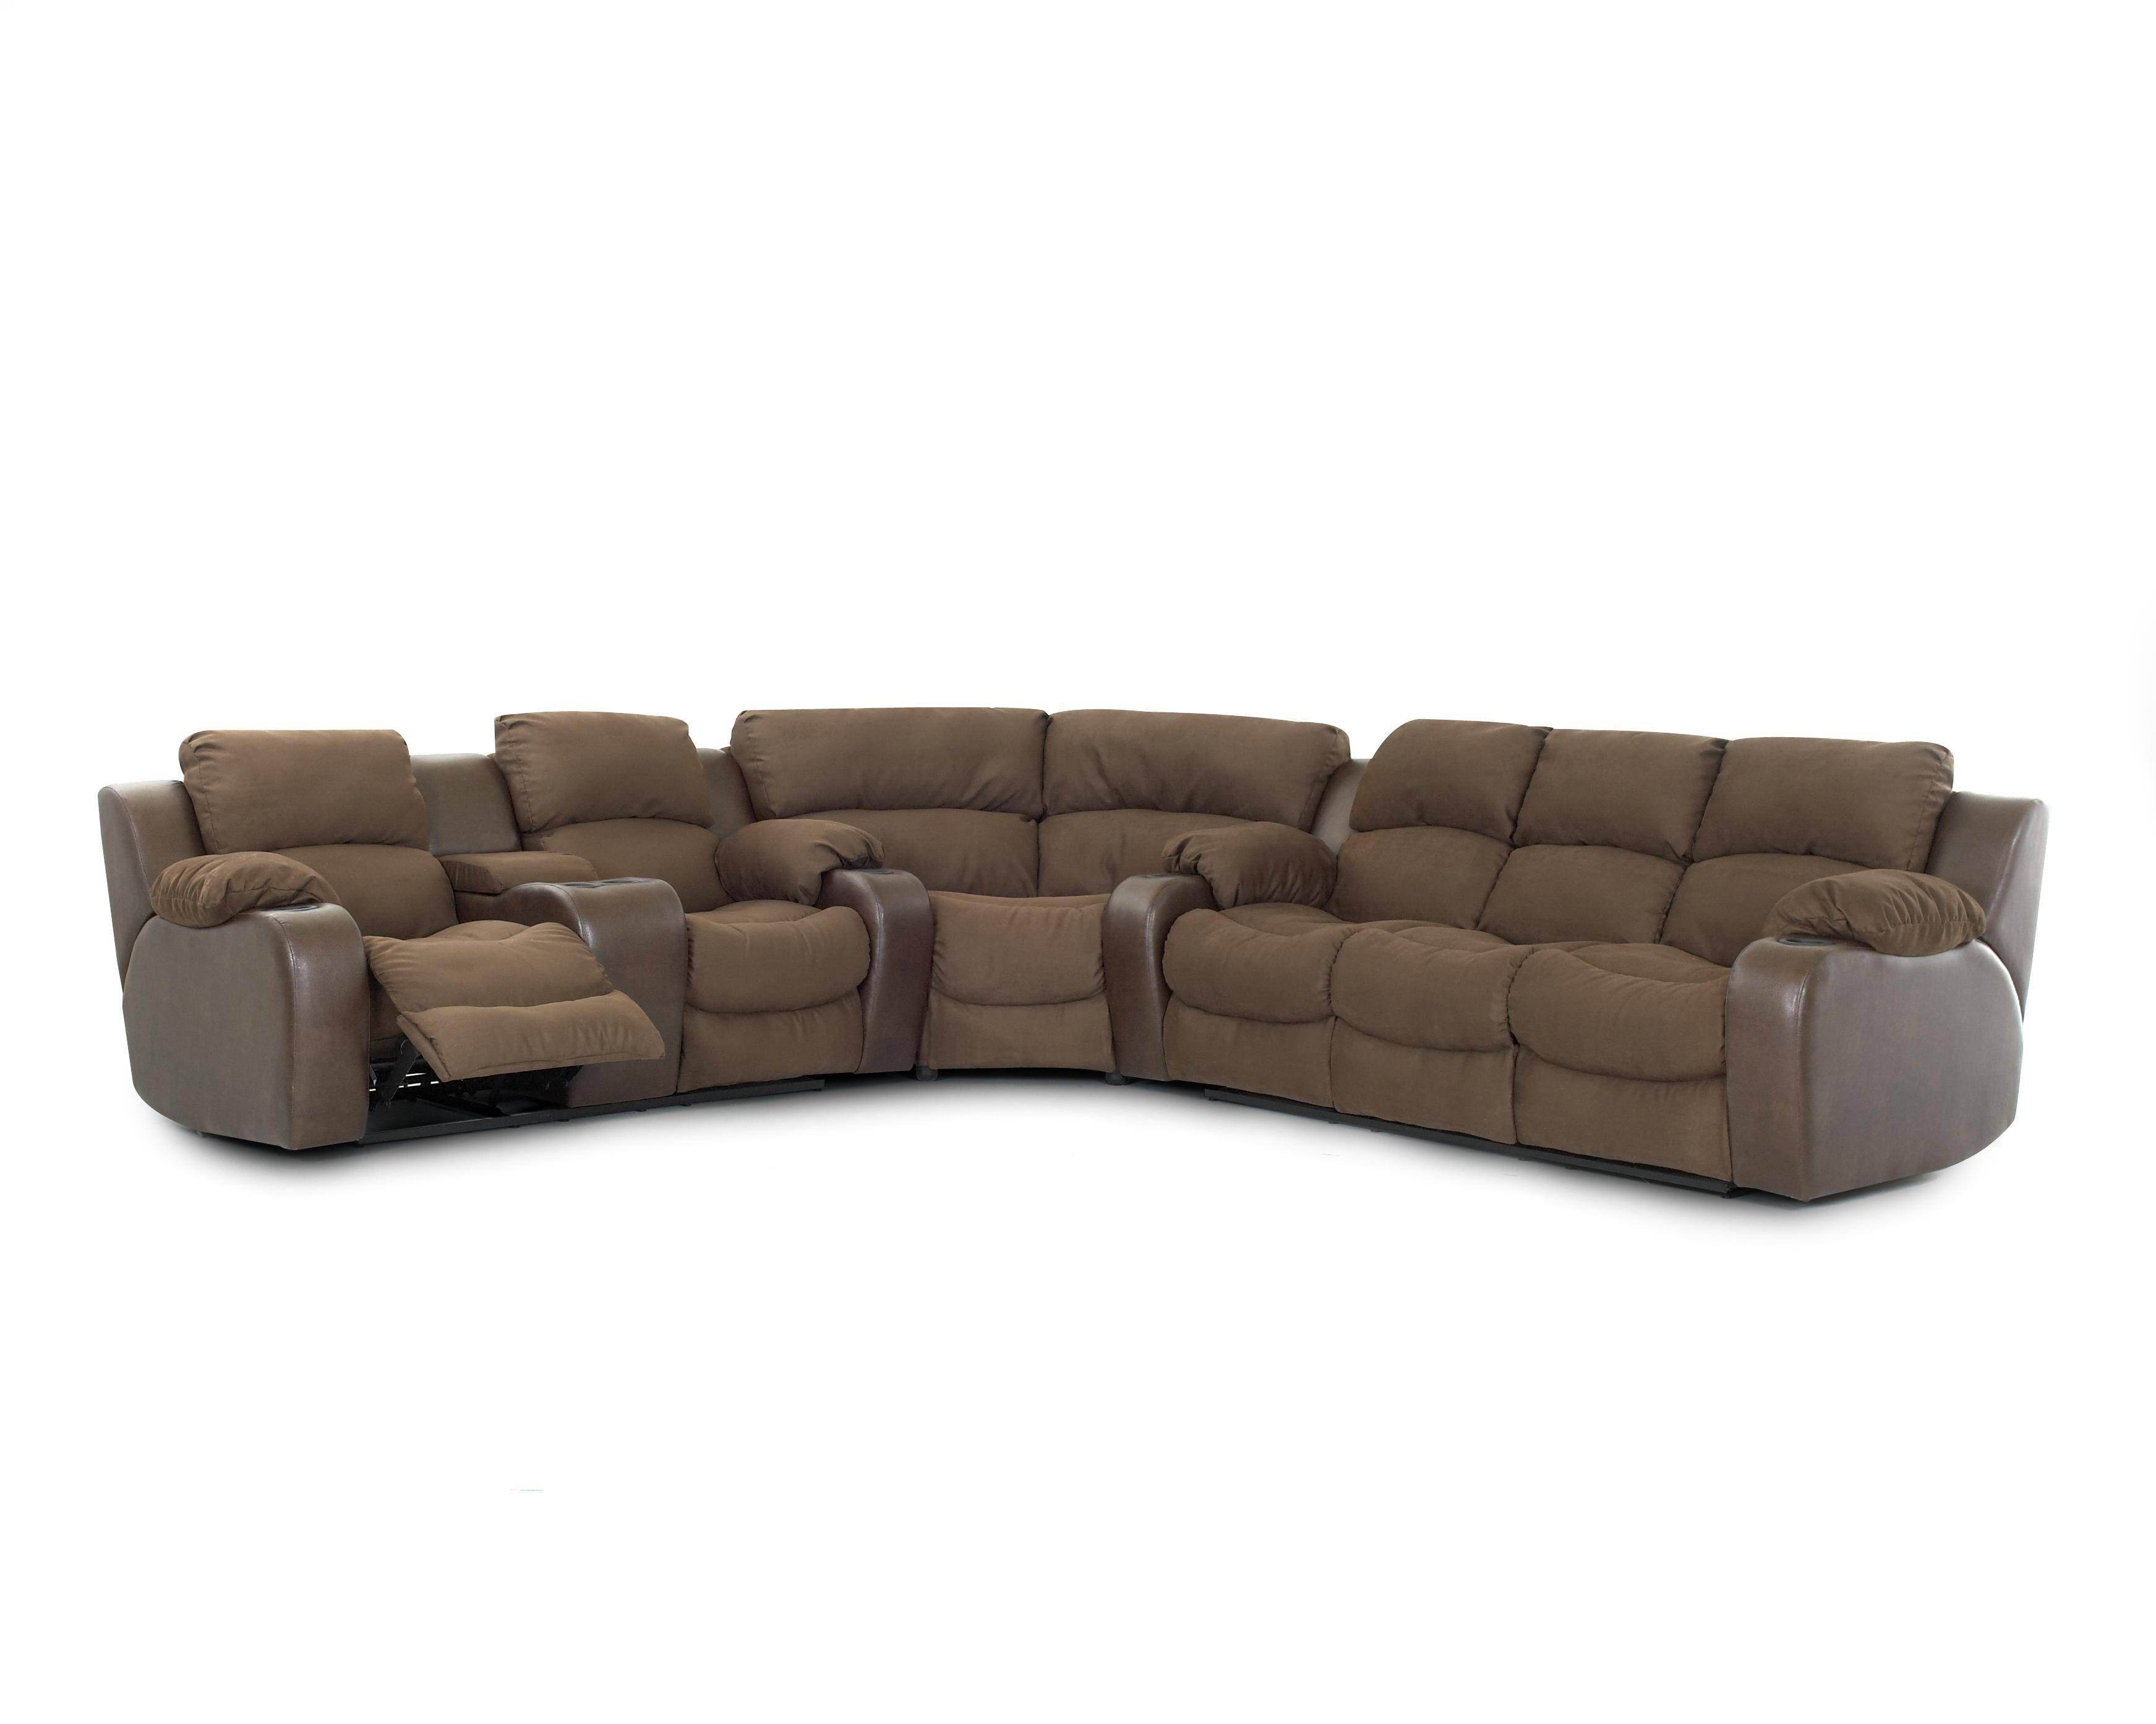 Reclining Sectional Sofa With Consoleklaussner | Wolf And Within Sofas With Consoles (View 8 of 30)